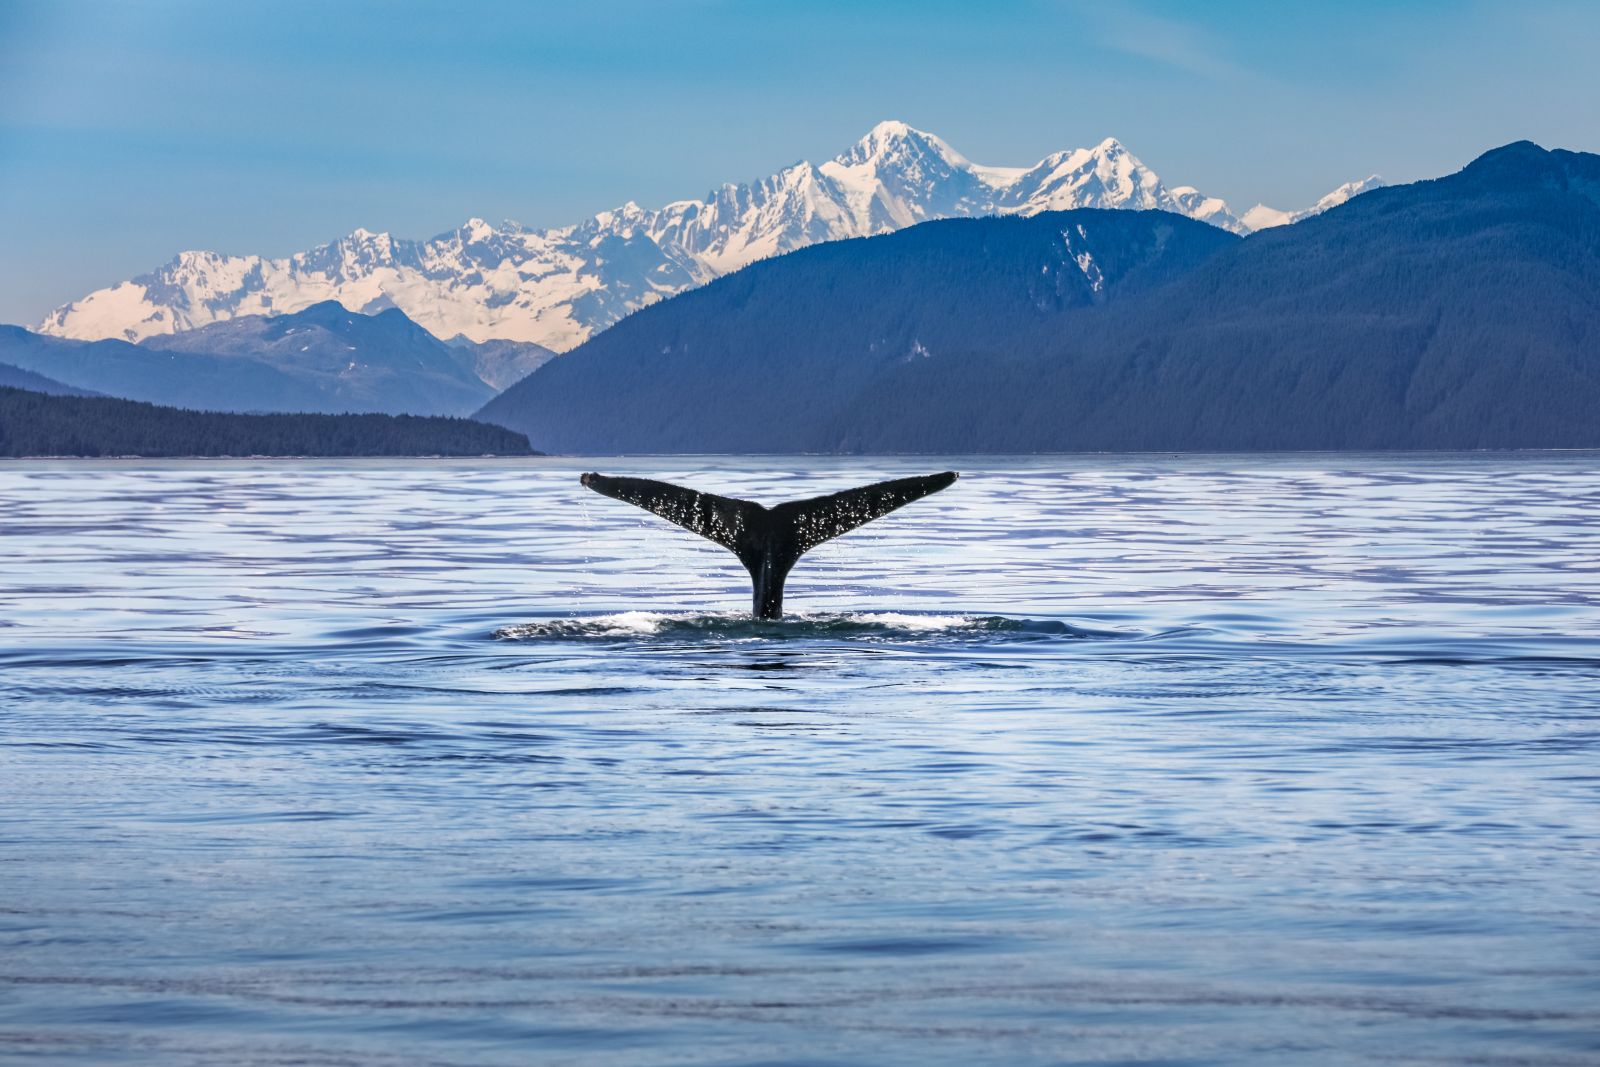 Tail of a whale breaking the surface of the water in Alaska